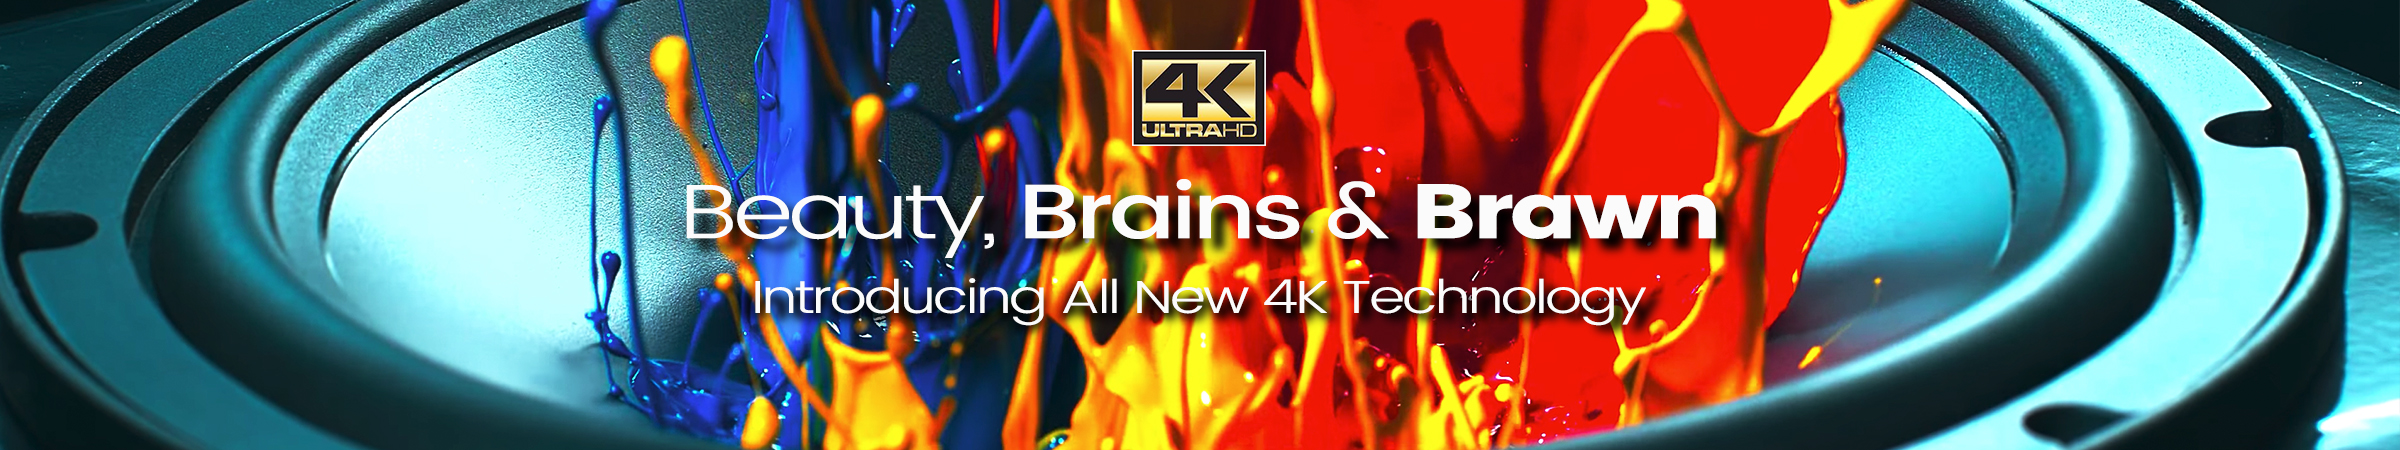 Introducing All New 4K Technology